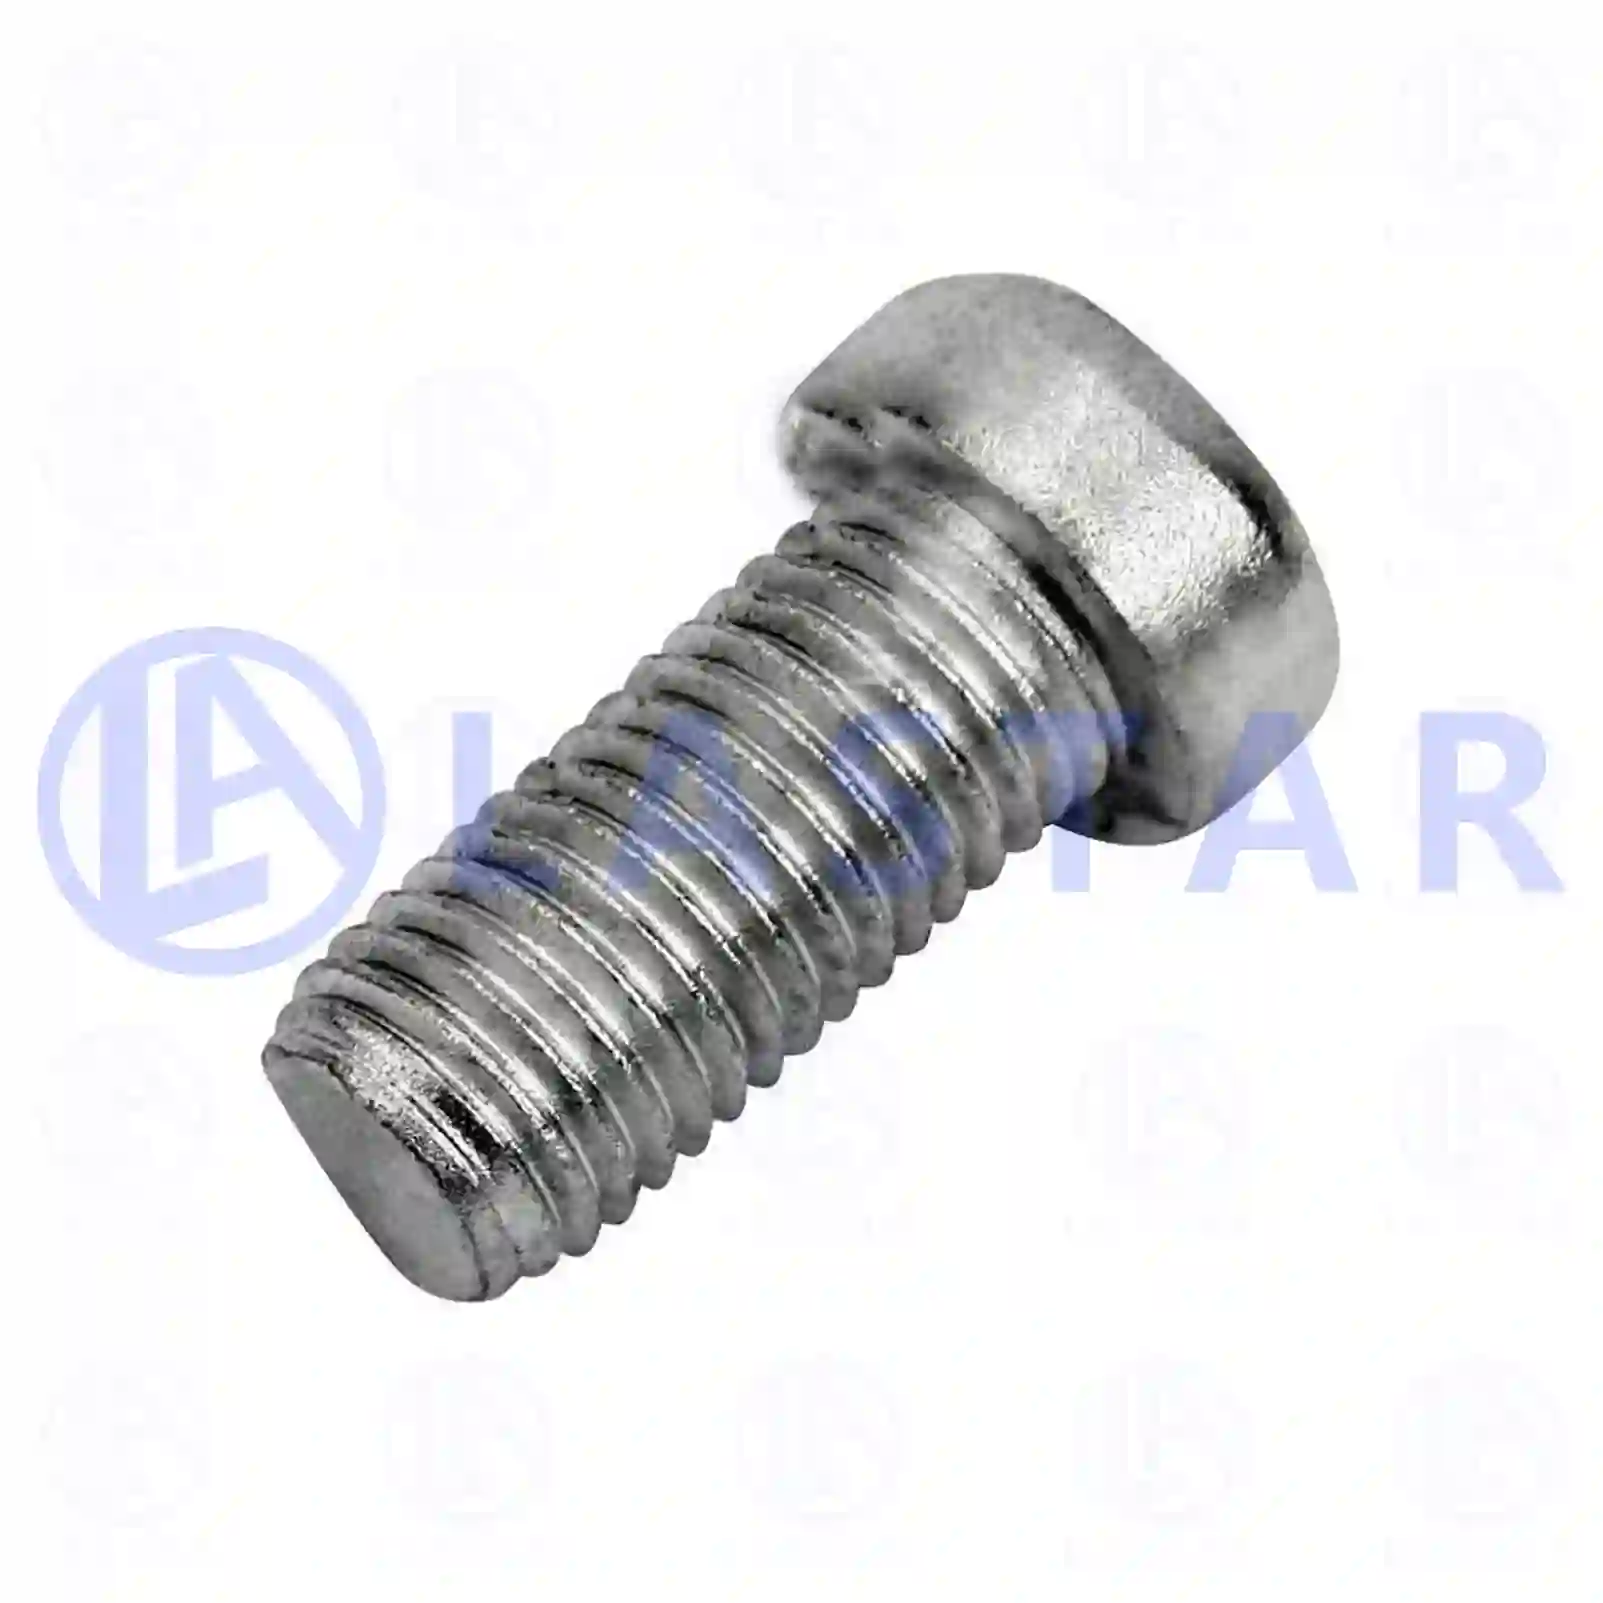 Screw, 77725125, 000912014091, 0059906104, ZG41500-0008, ||  77725125 Lastar Spare Part | Truck Spare Parts, Auotomotive Spare Parts Screw, 77725125, 000912014091, 0059906104, ZG41500-0008, ||  77725125 Lastar Spare Part | Truck Spare Parts, Auotomotive Spare Parts